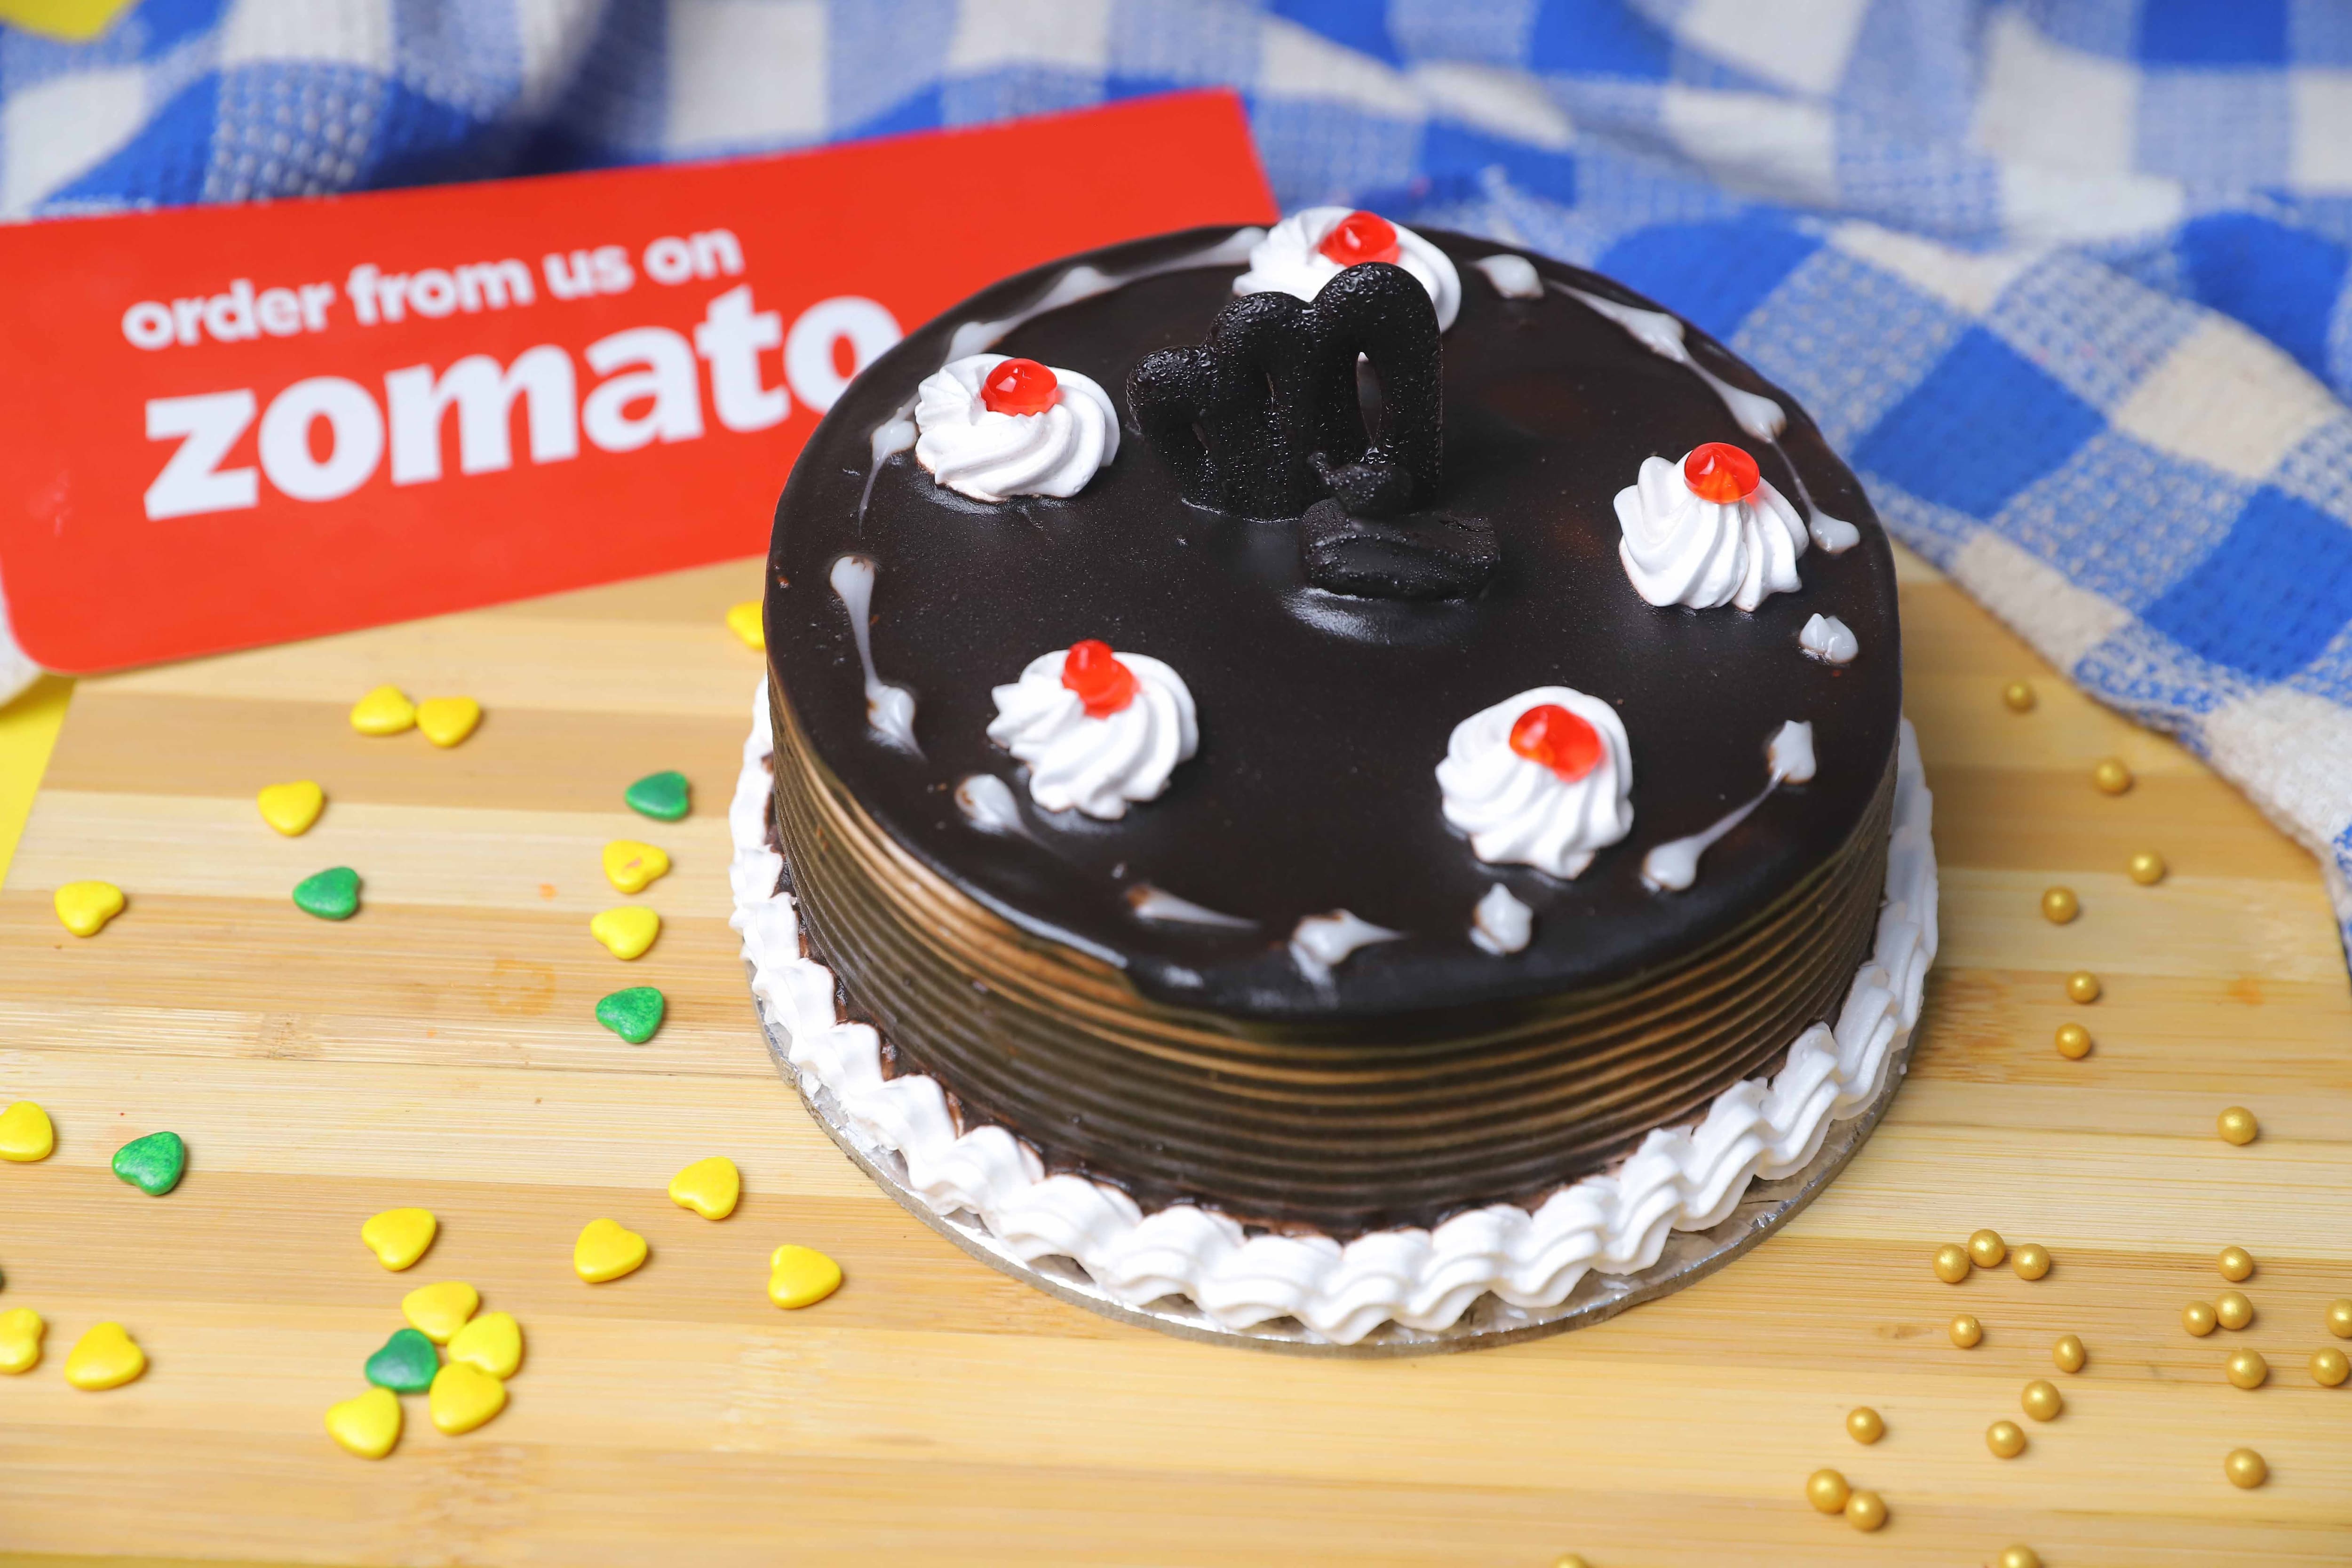 Zomato Sent Cake To Customer With Message 